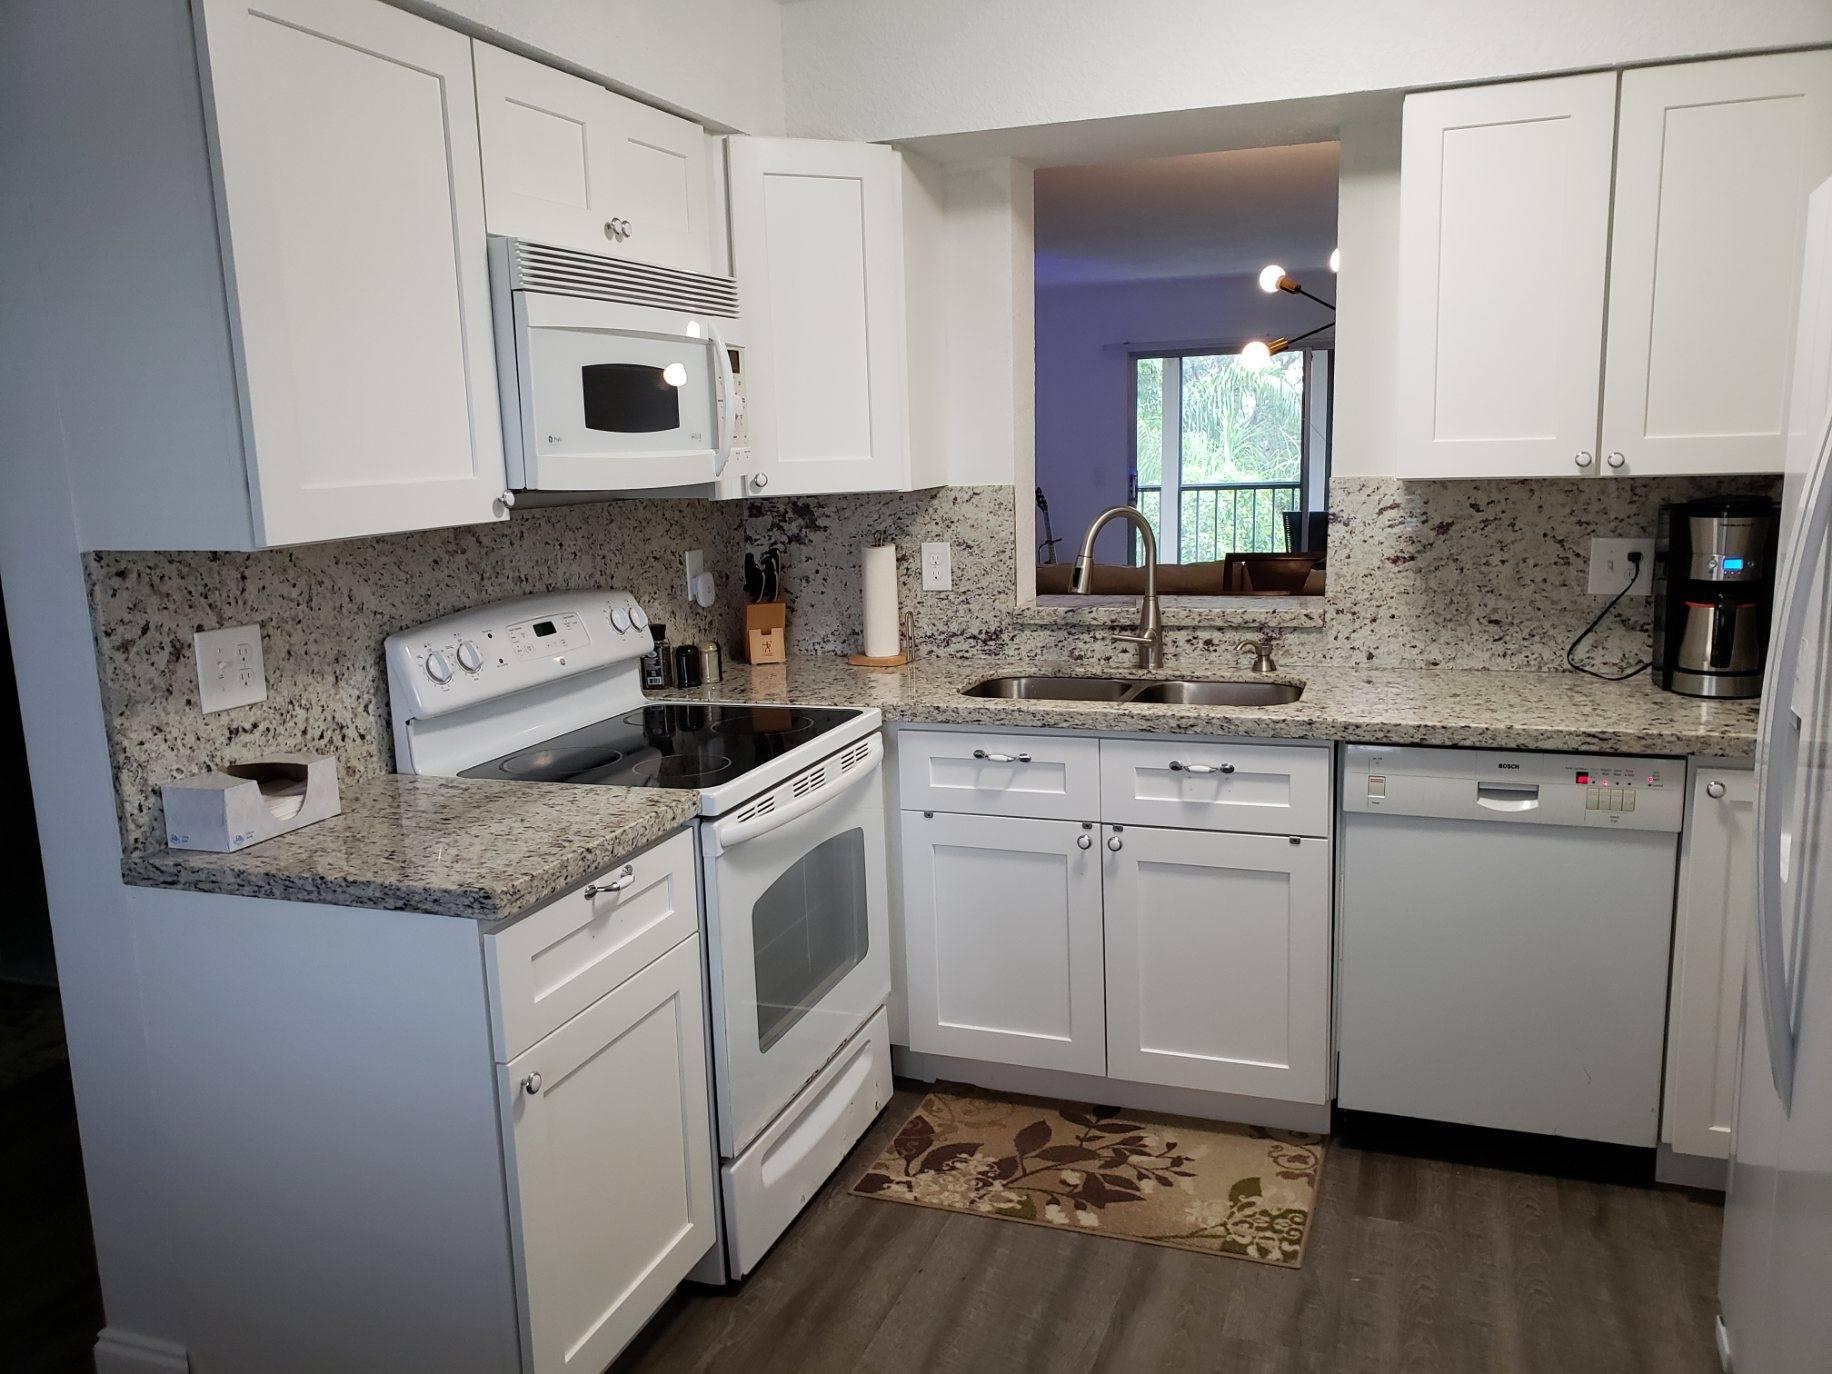 a kitchen with granite countertop cabinets stainless steel appliances and a wooden floor